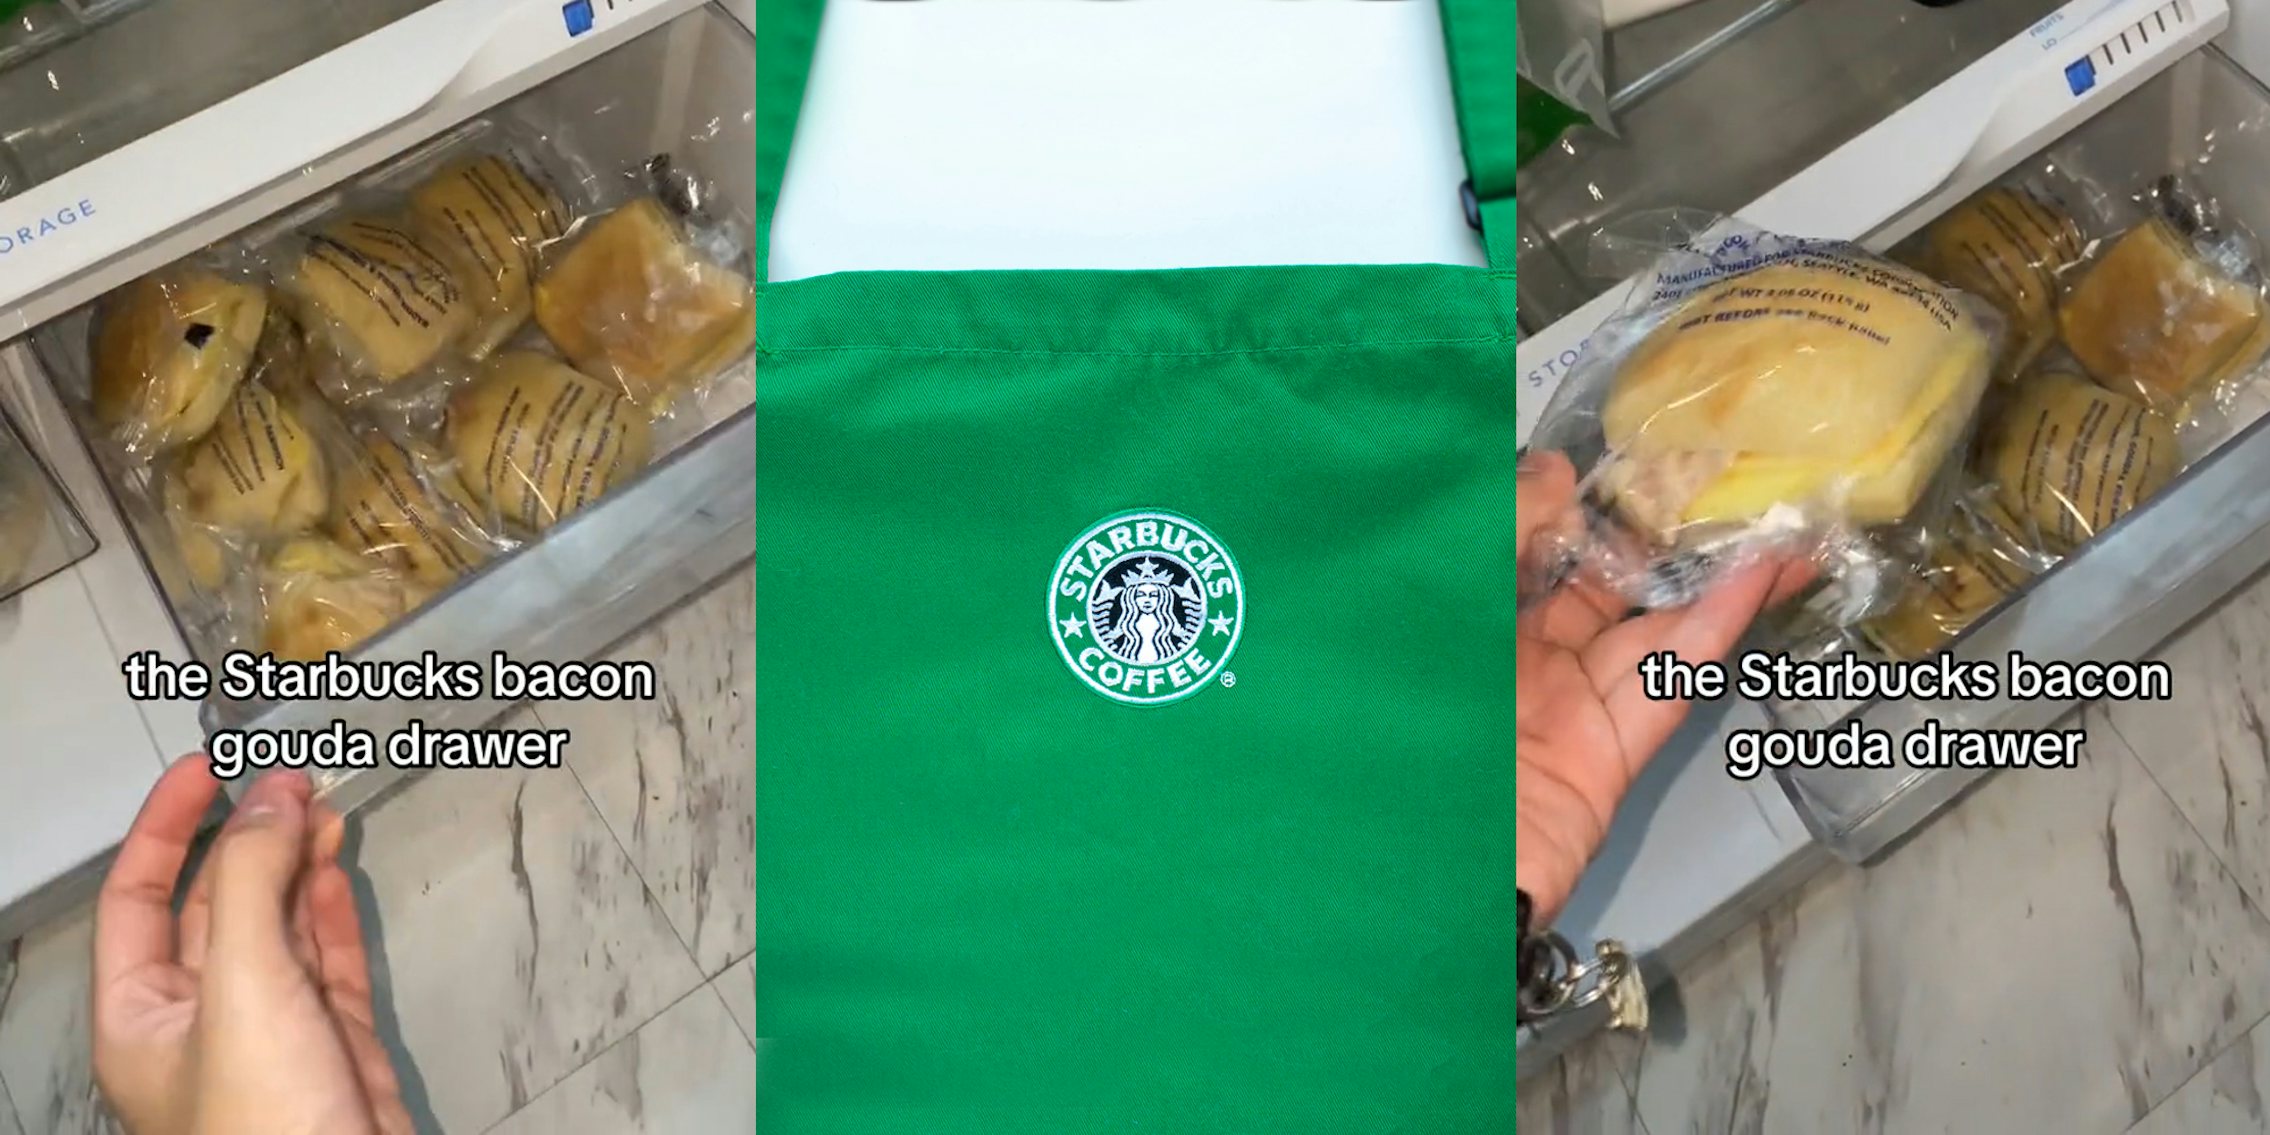 hand pulling out fridge drawer full of Starbucks bacon gouda sandwiches with caption 'the Starbucks bacon gouda drawer' (l) Starbucks apron in front of white background (c) hand holding sandwich in front of fridge drawer full of Starbucks bacon gouda sandwiches with caption 'the Starbucks bacon gouda drawer' (r)